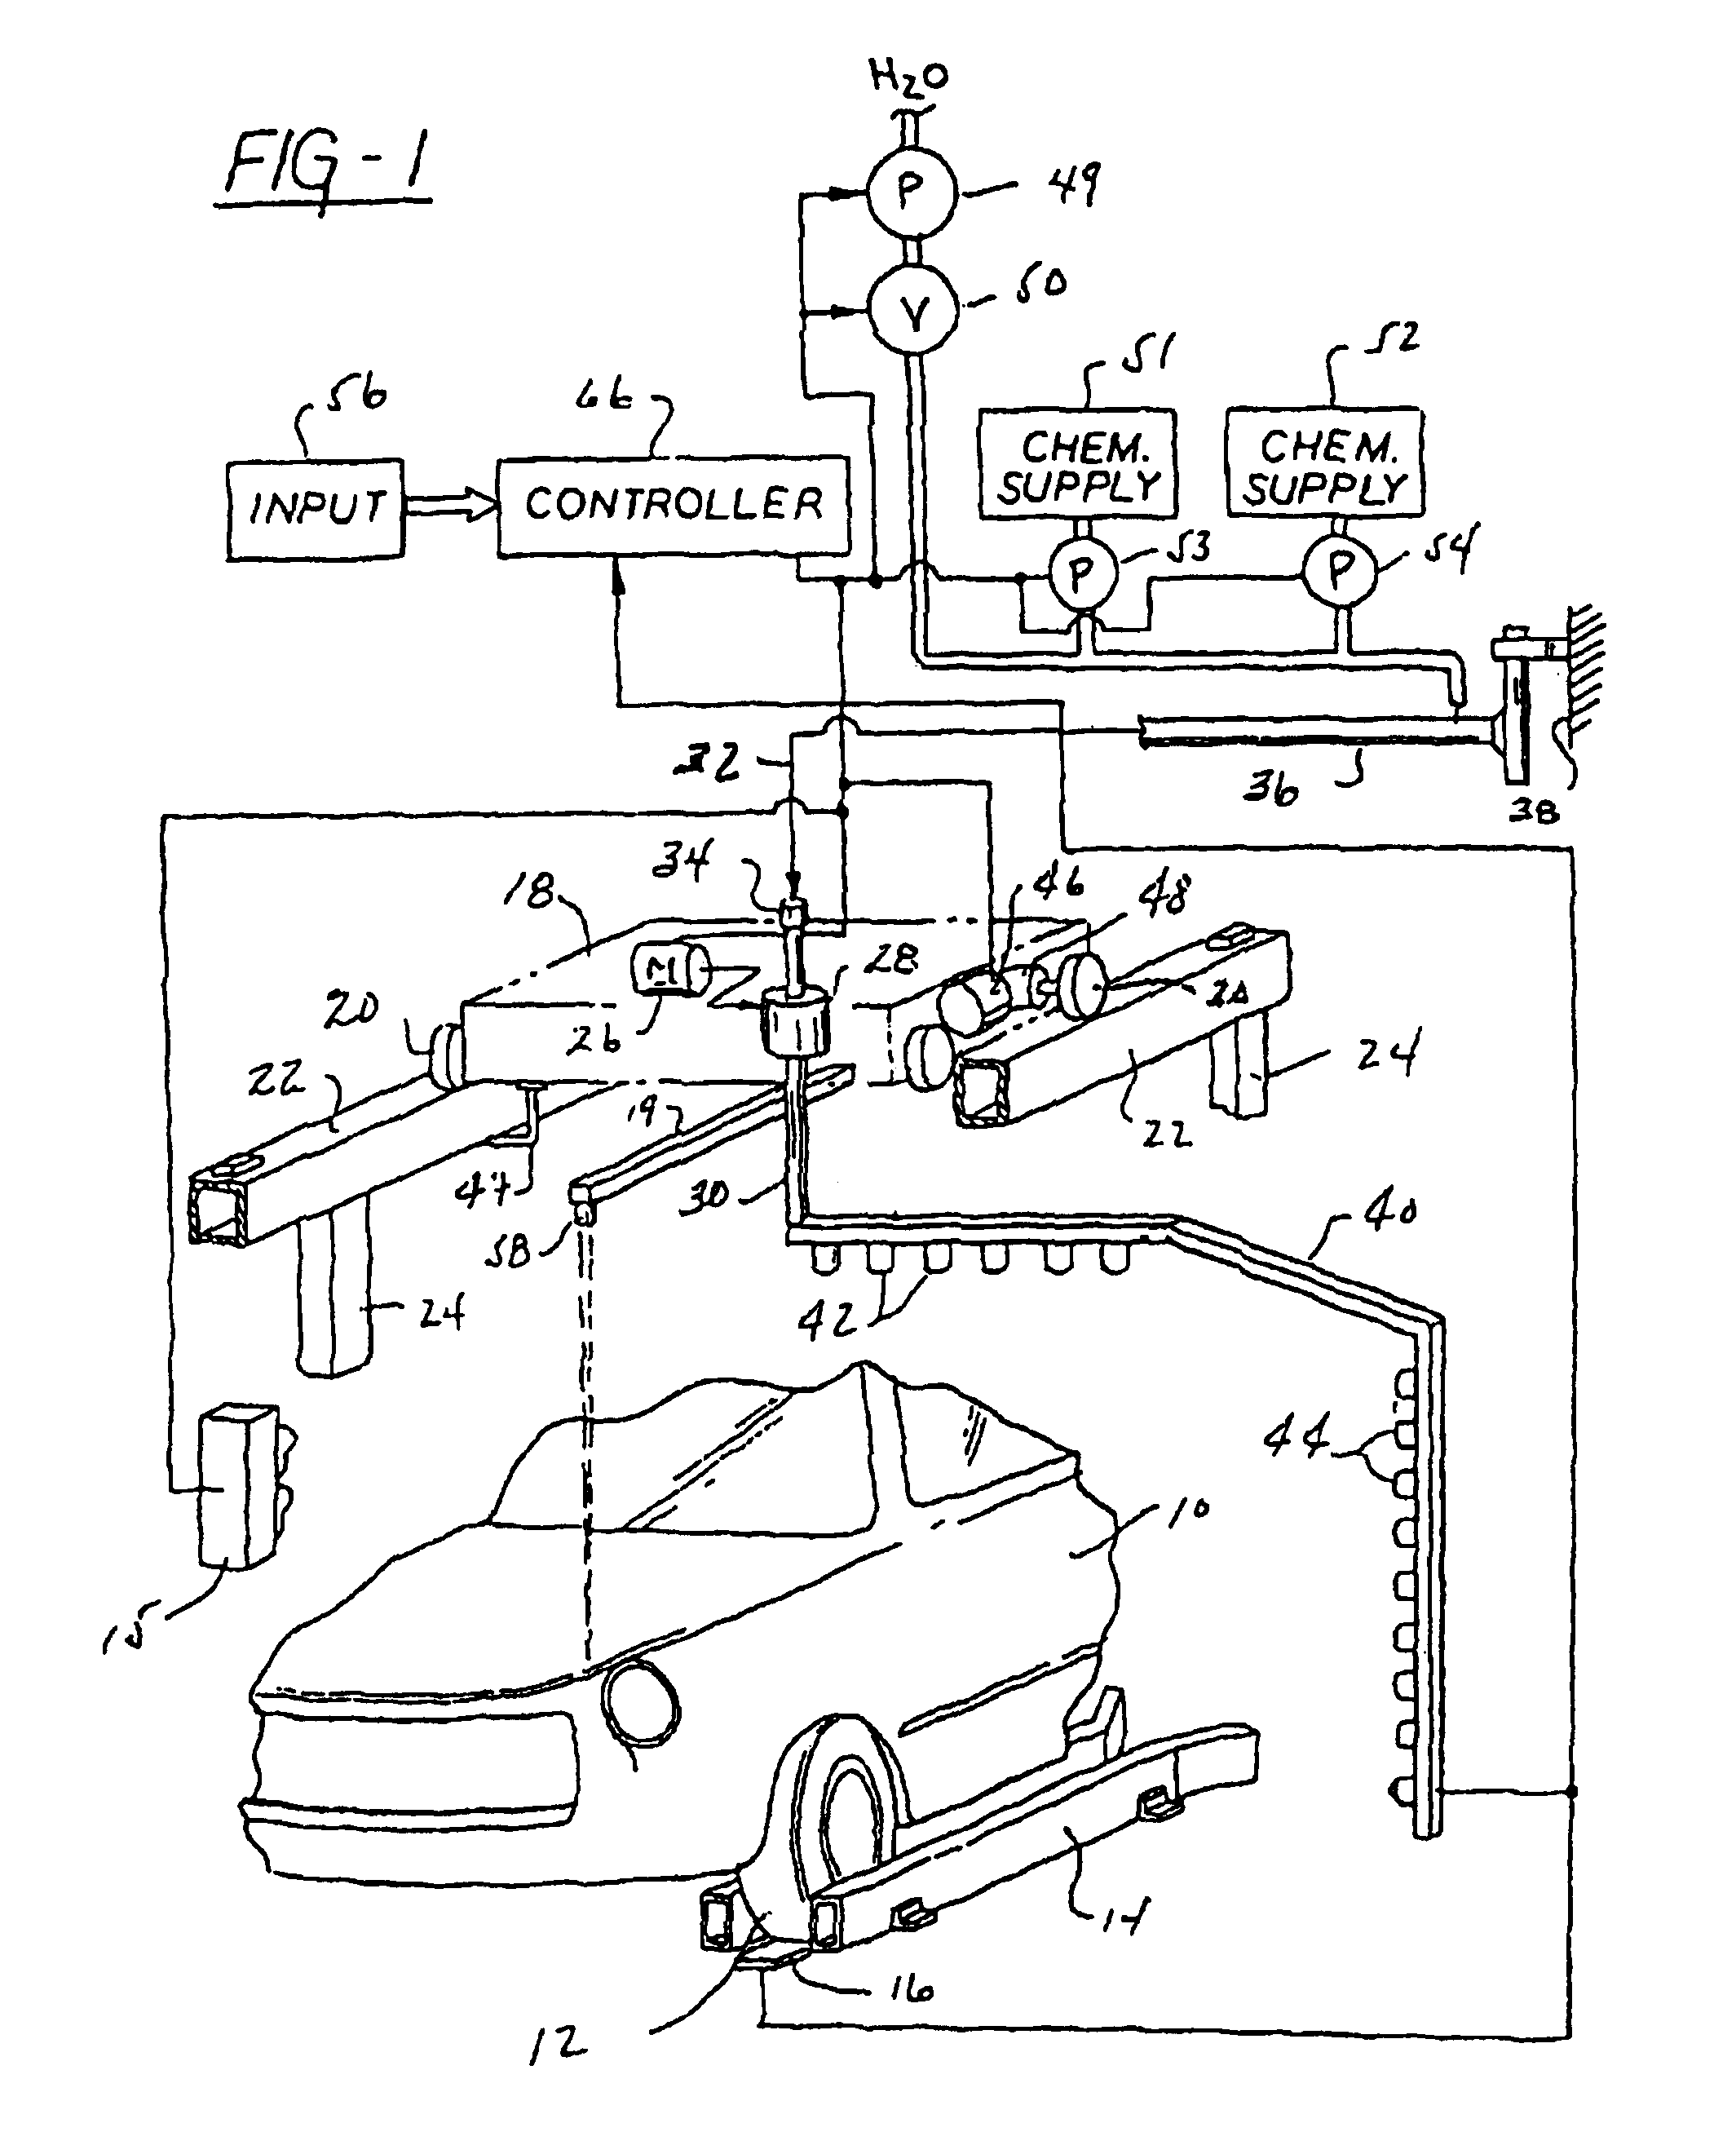 Rollover pressure car wash apparatus and methods of operating same